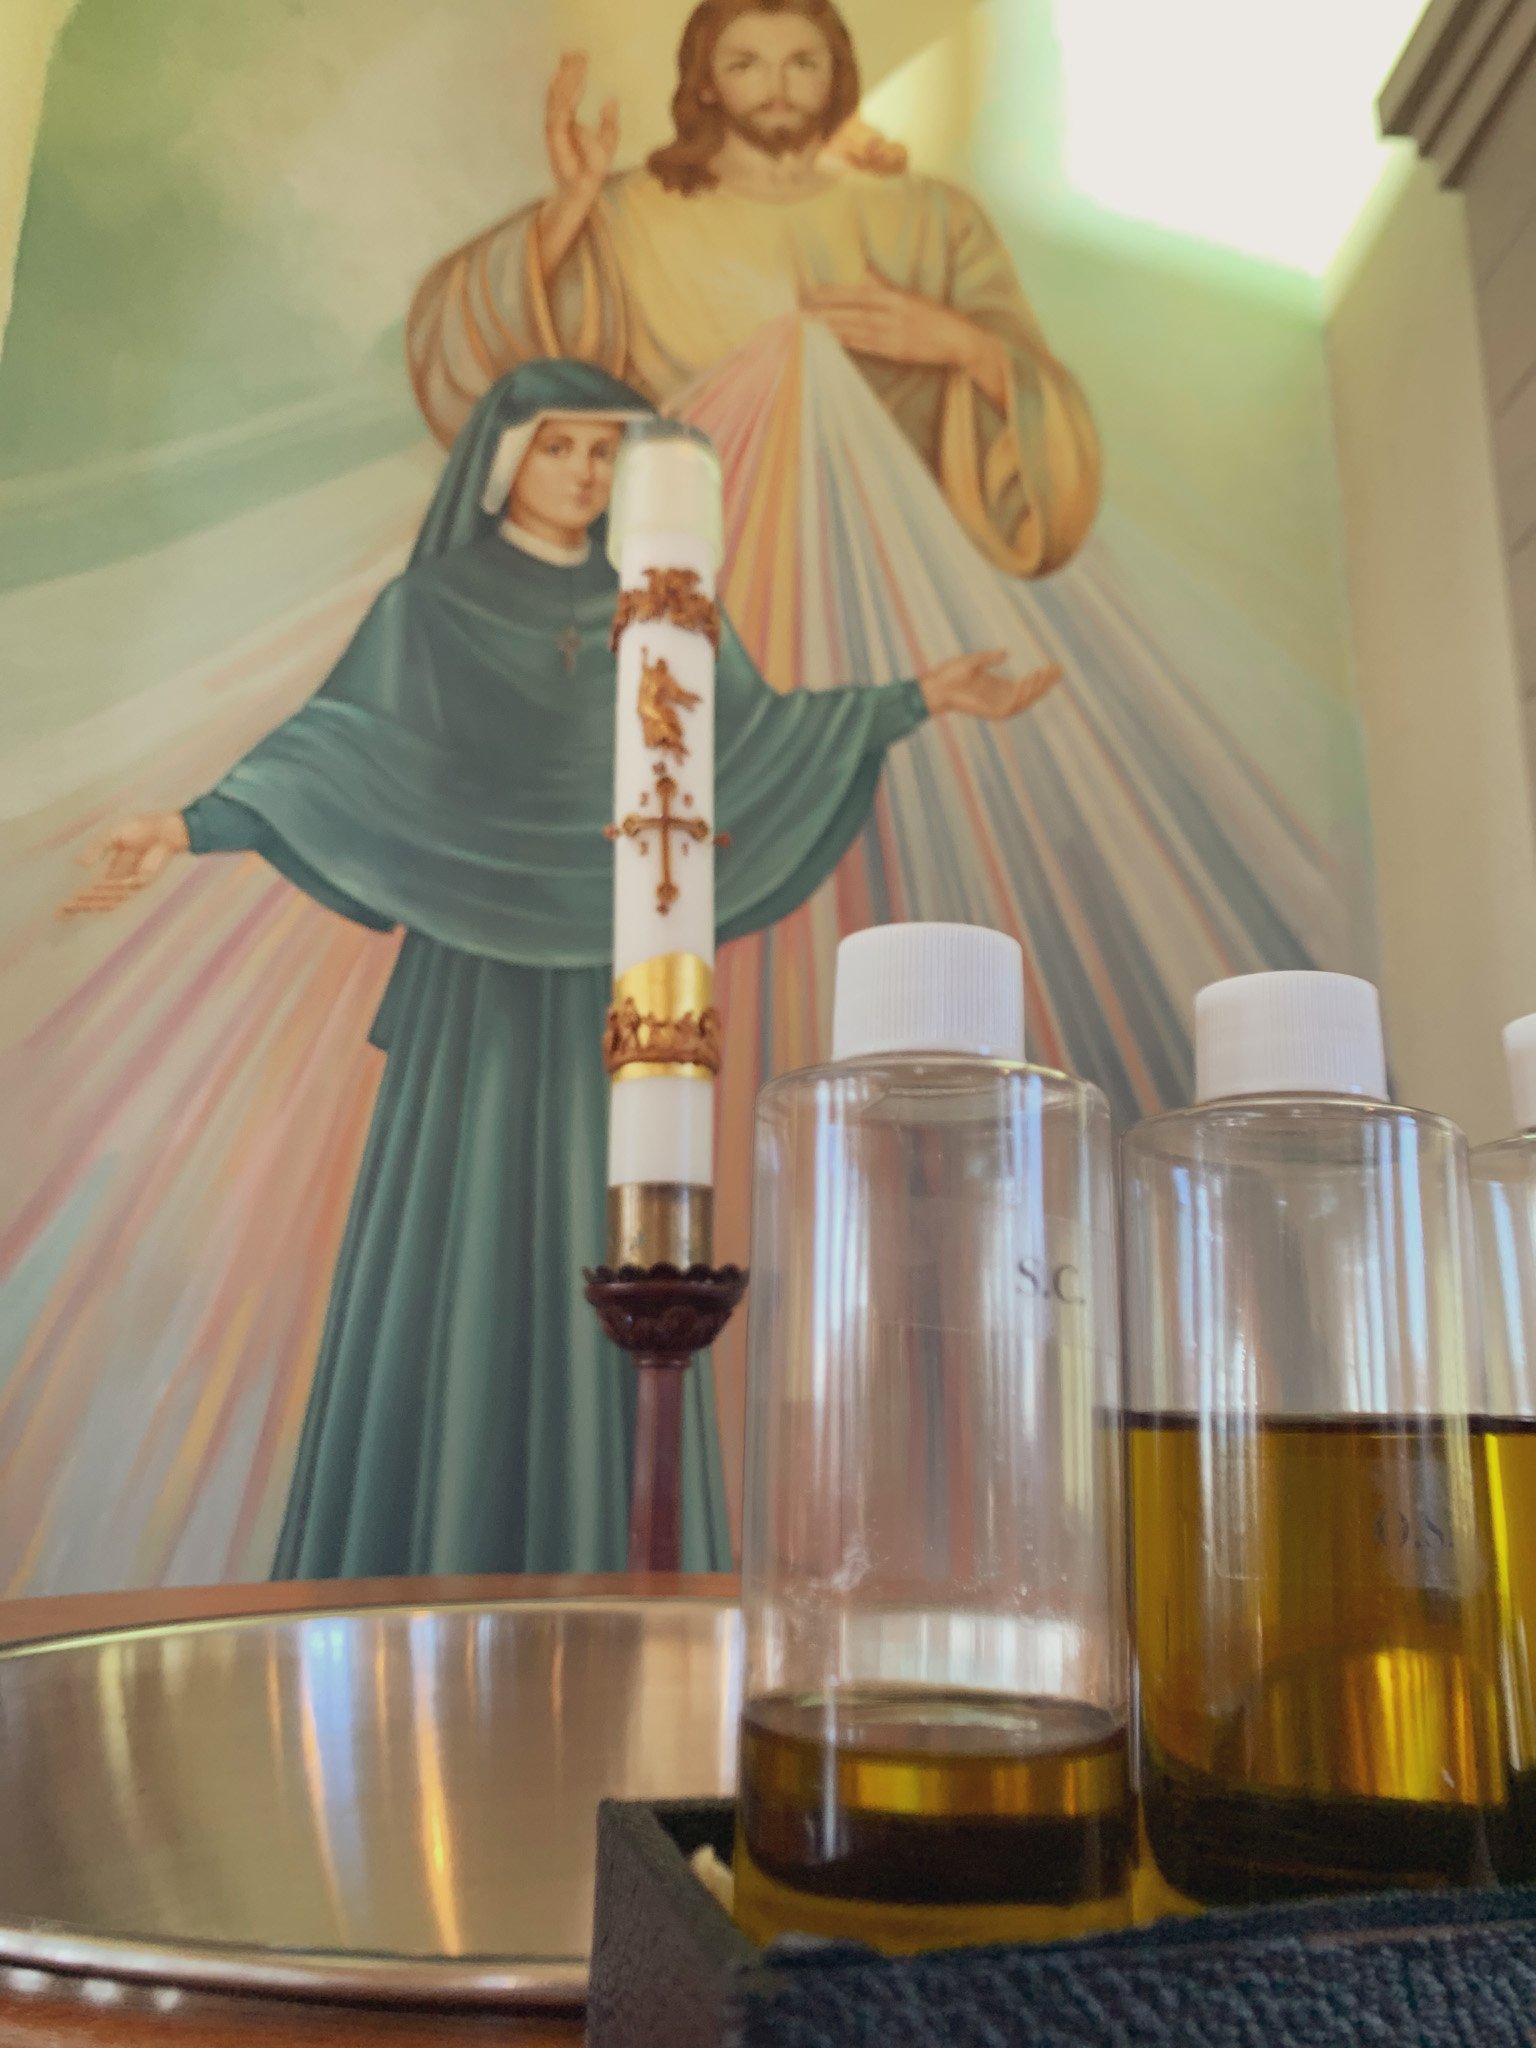 Holy oils on baptismal font with baptismal candle behind